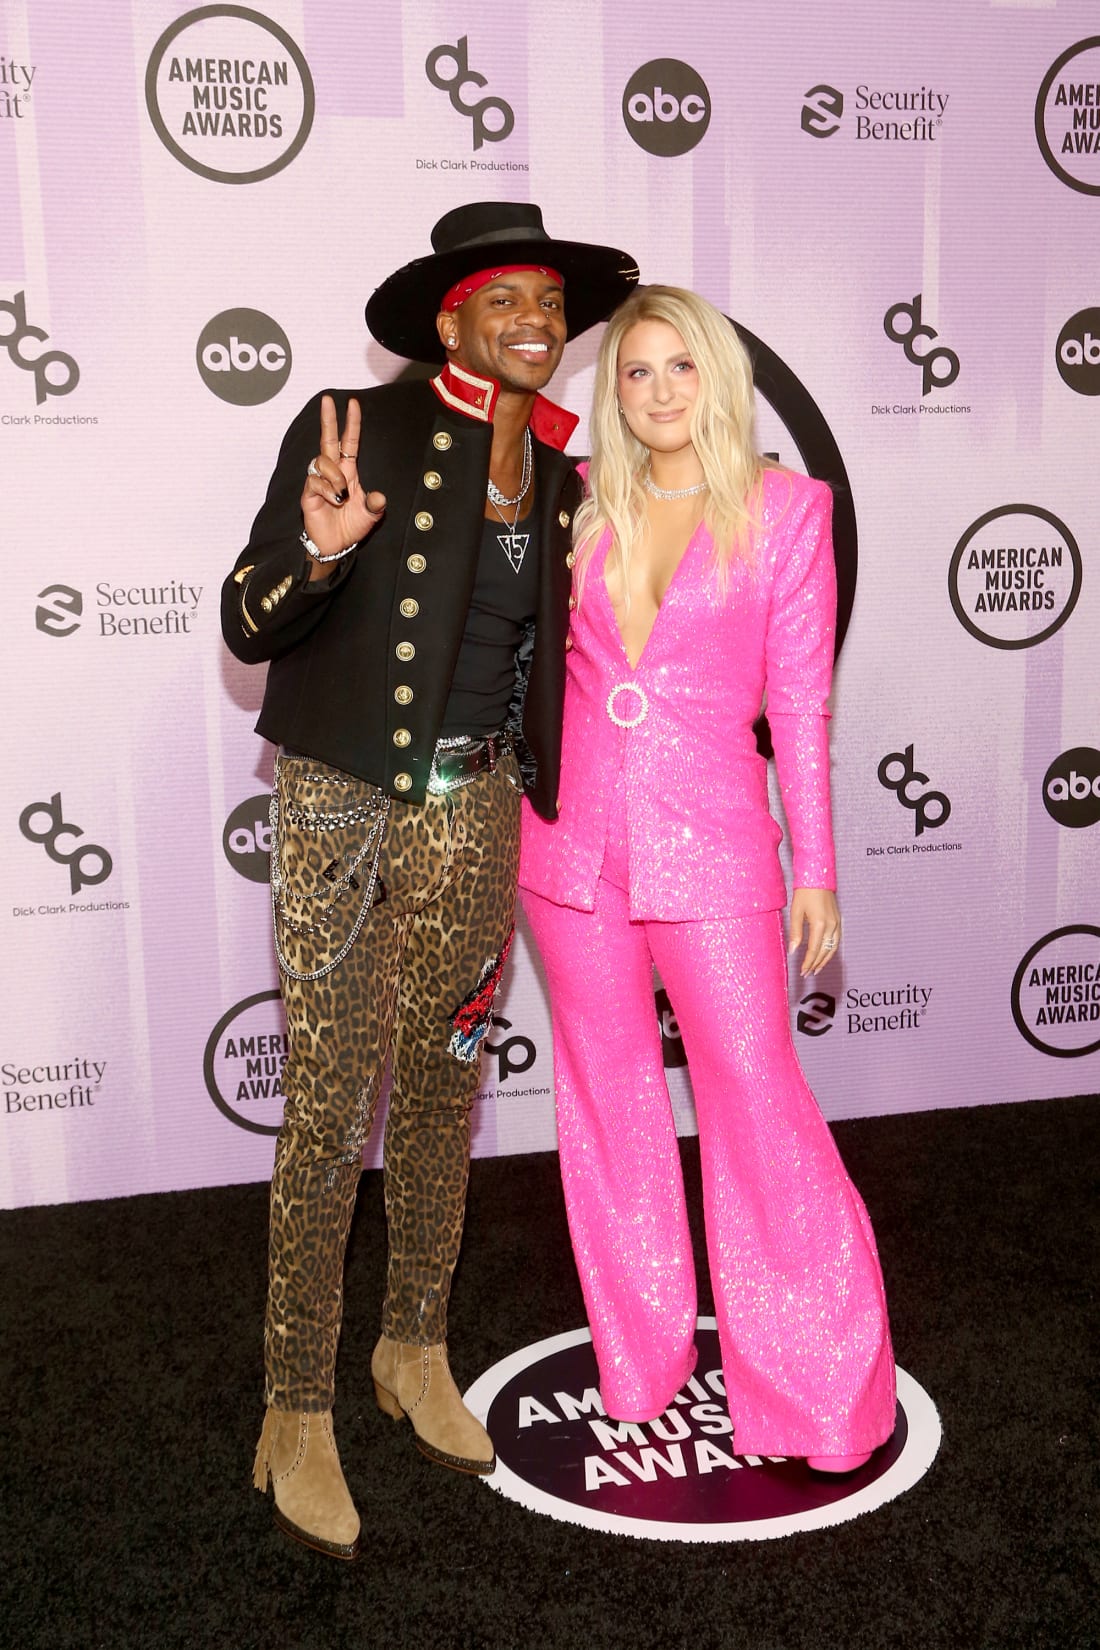 Awards presenters Jimmie Allen and Meghan Trainor pose together on the red carpet. 